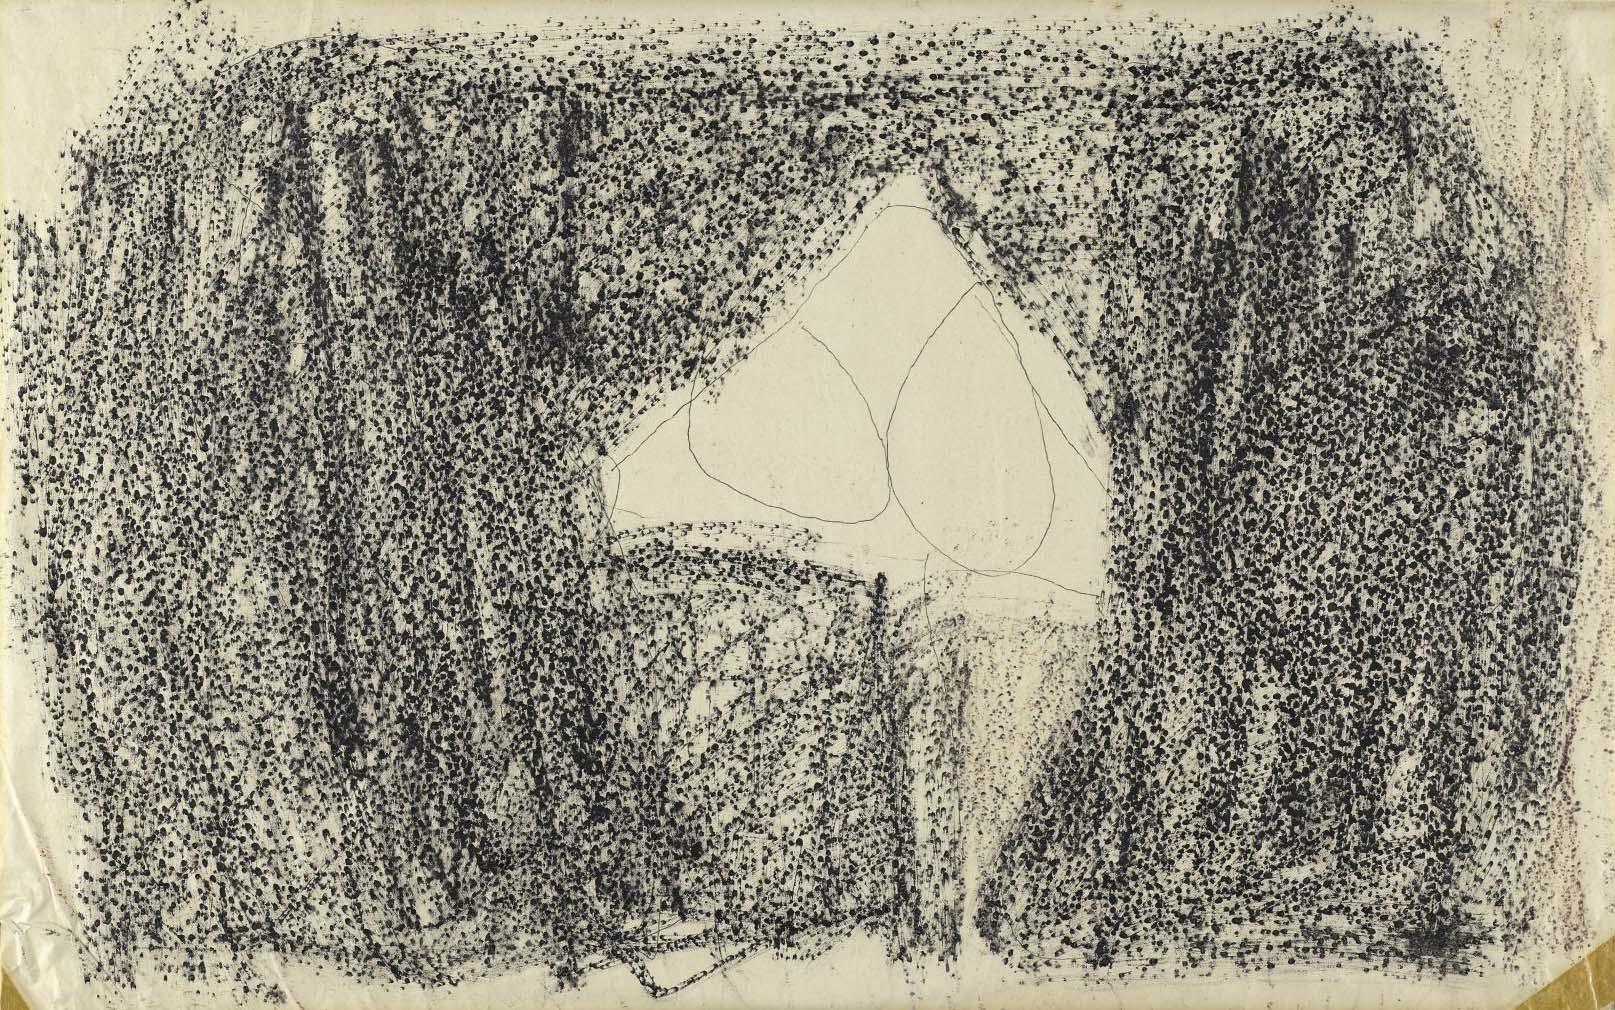 Madrid No. 1, 1958. Crayon and ink on paper, 15 1/8 x 24 inches (38.4 x 61 cm)